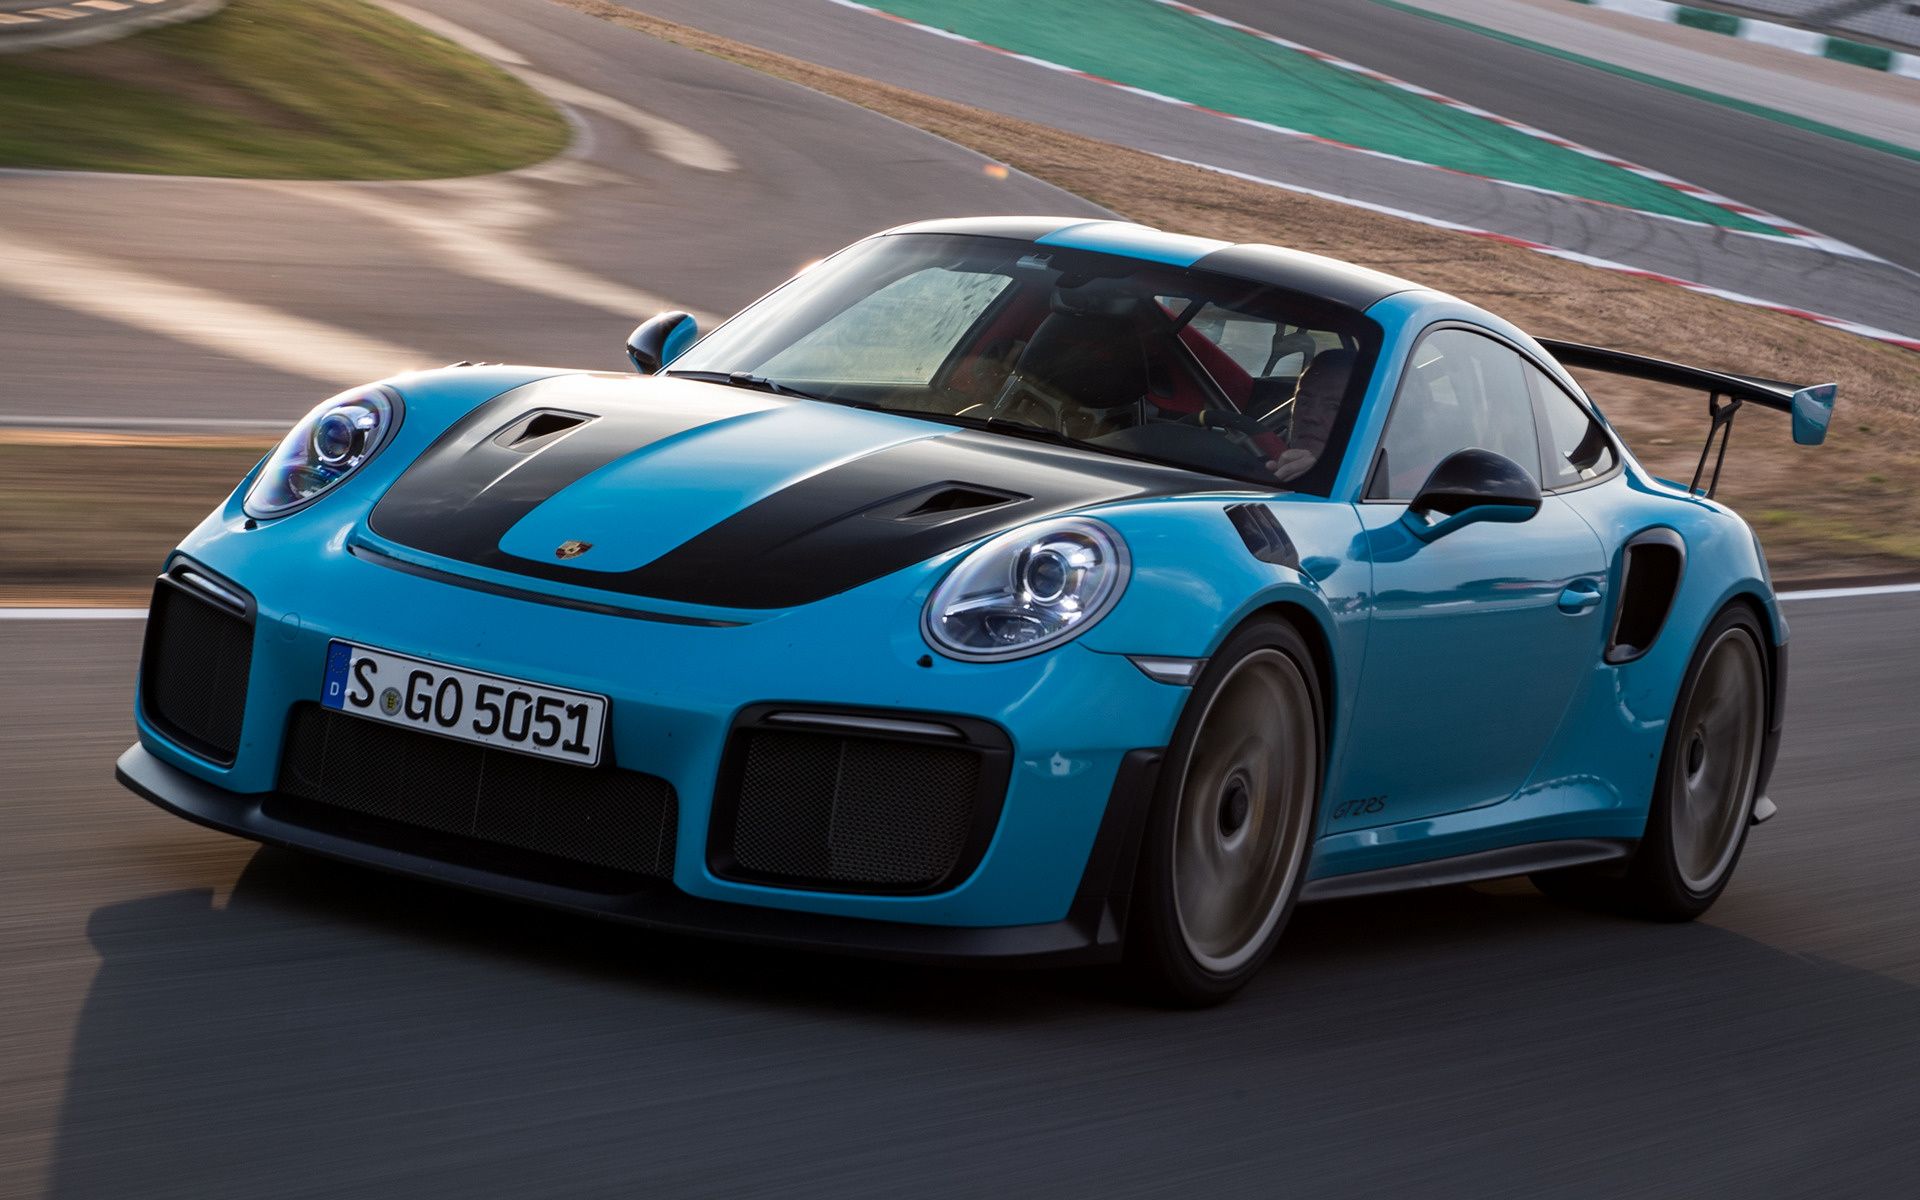 Porsche 911 GT2 RS and HD Image